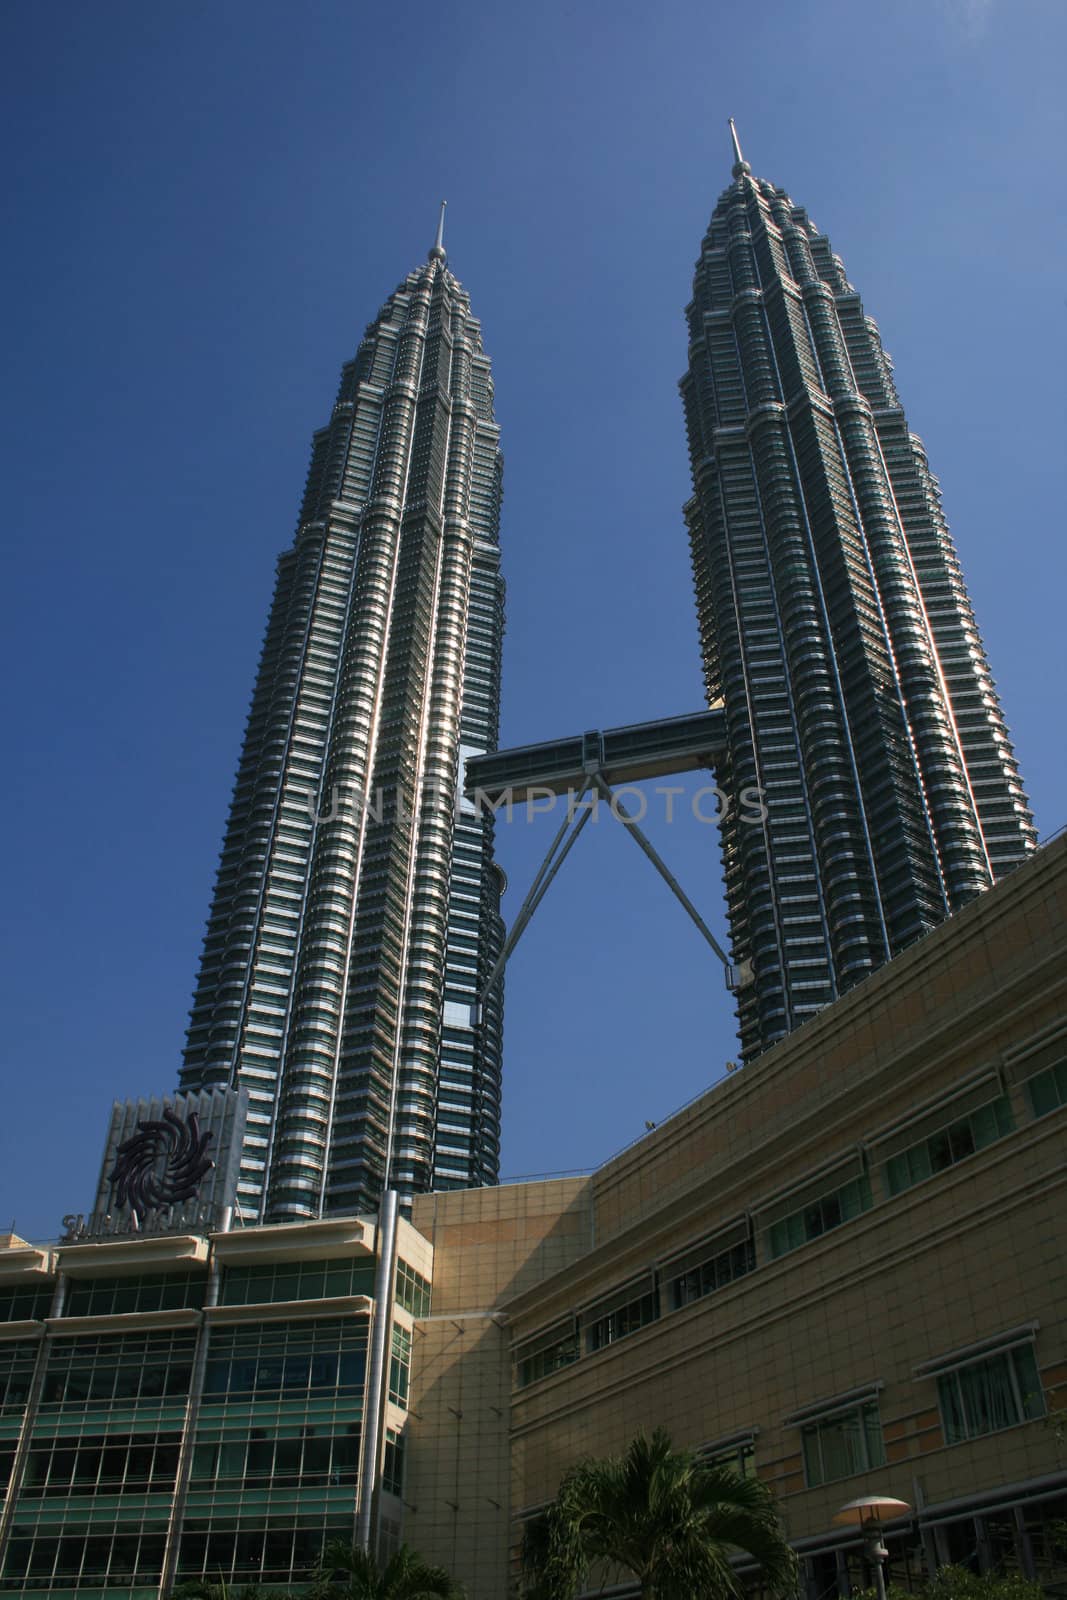 KLCC, Twins towers in Kuala Lumpur Malaysia is the landmark of Malaysia. All the tourist will come to this place and lot of event organize here. This can be use in Travel Magazine or book.